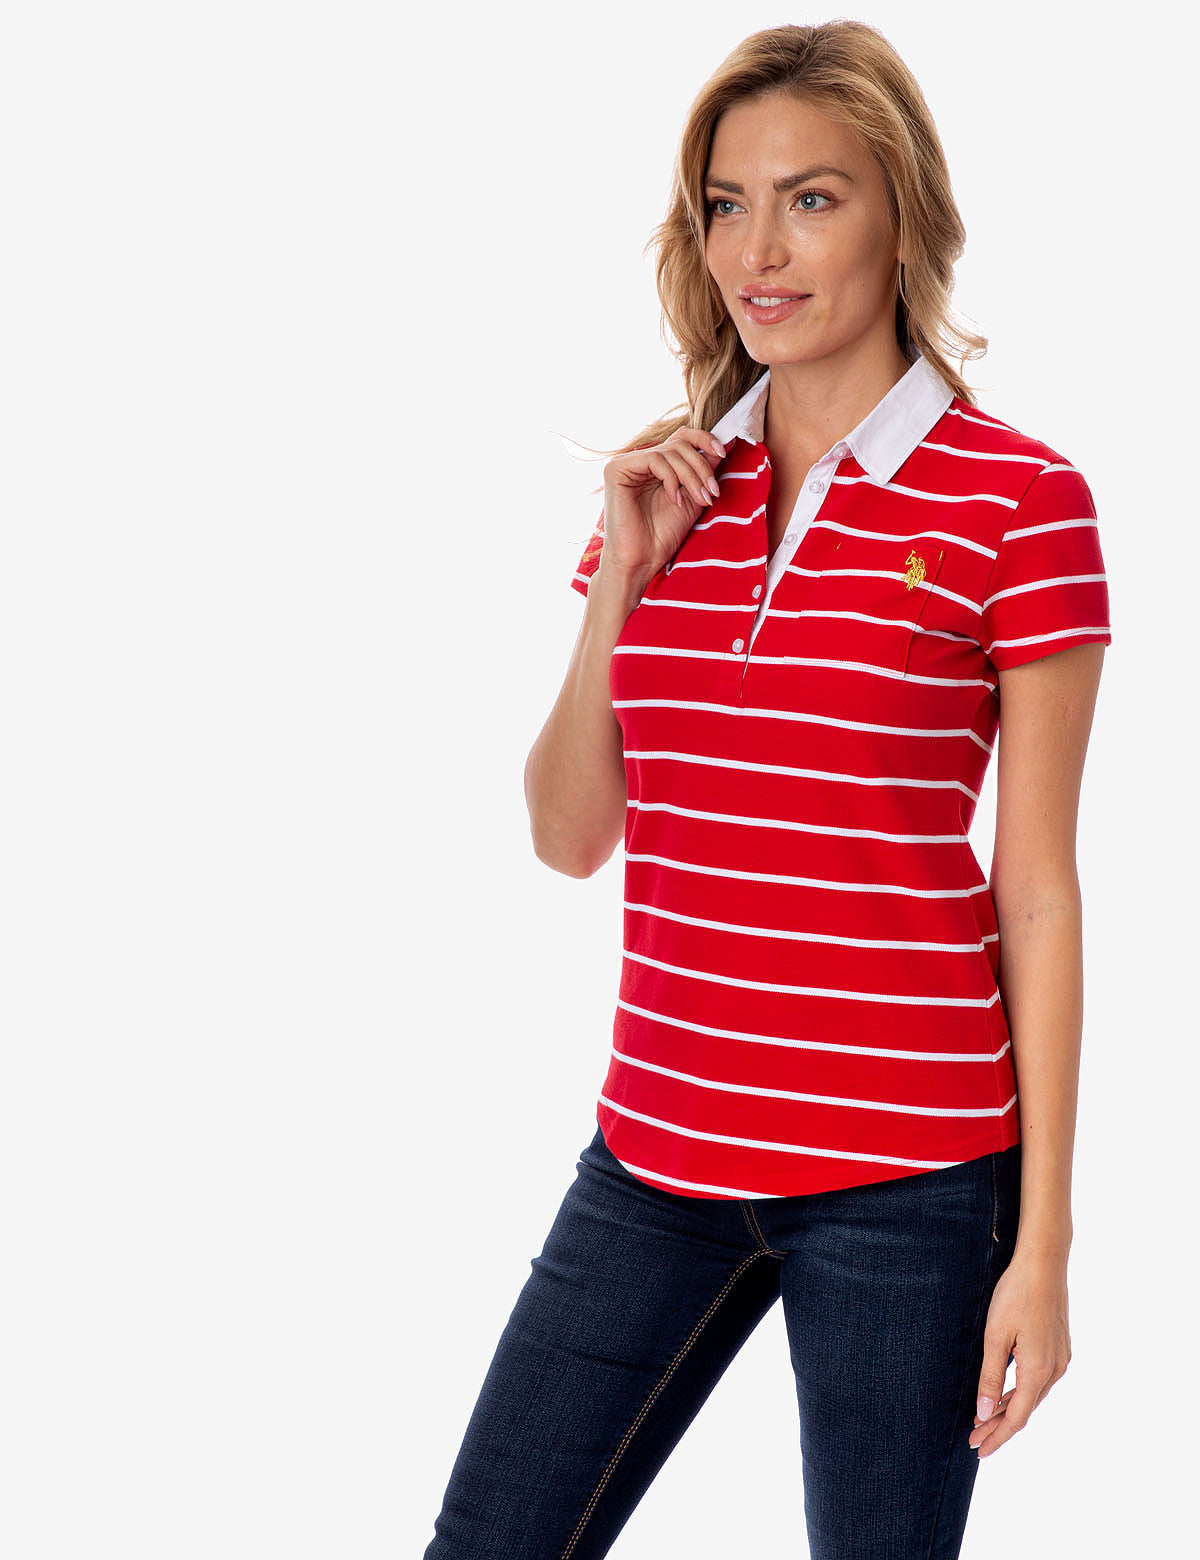 mens striped polo shirt with pocket